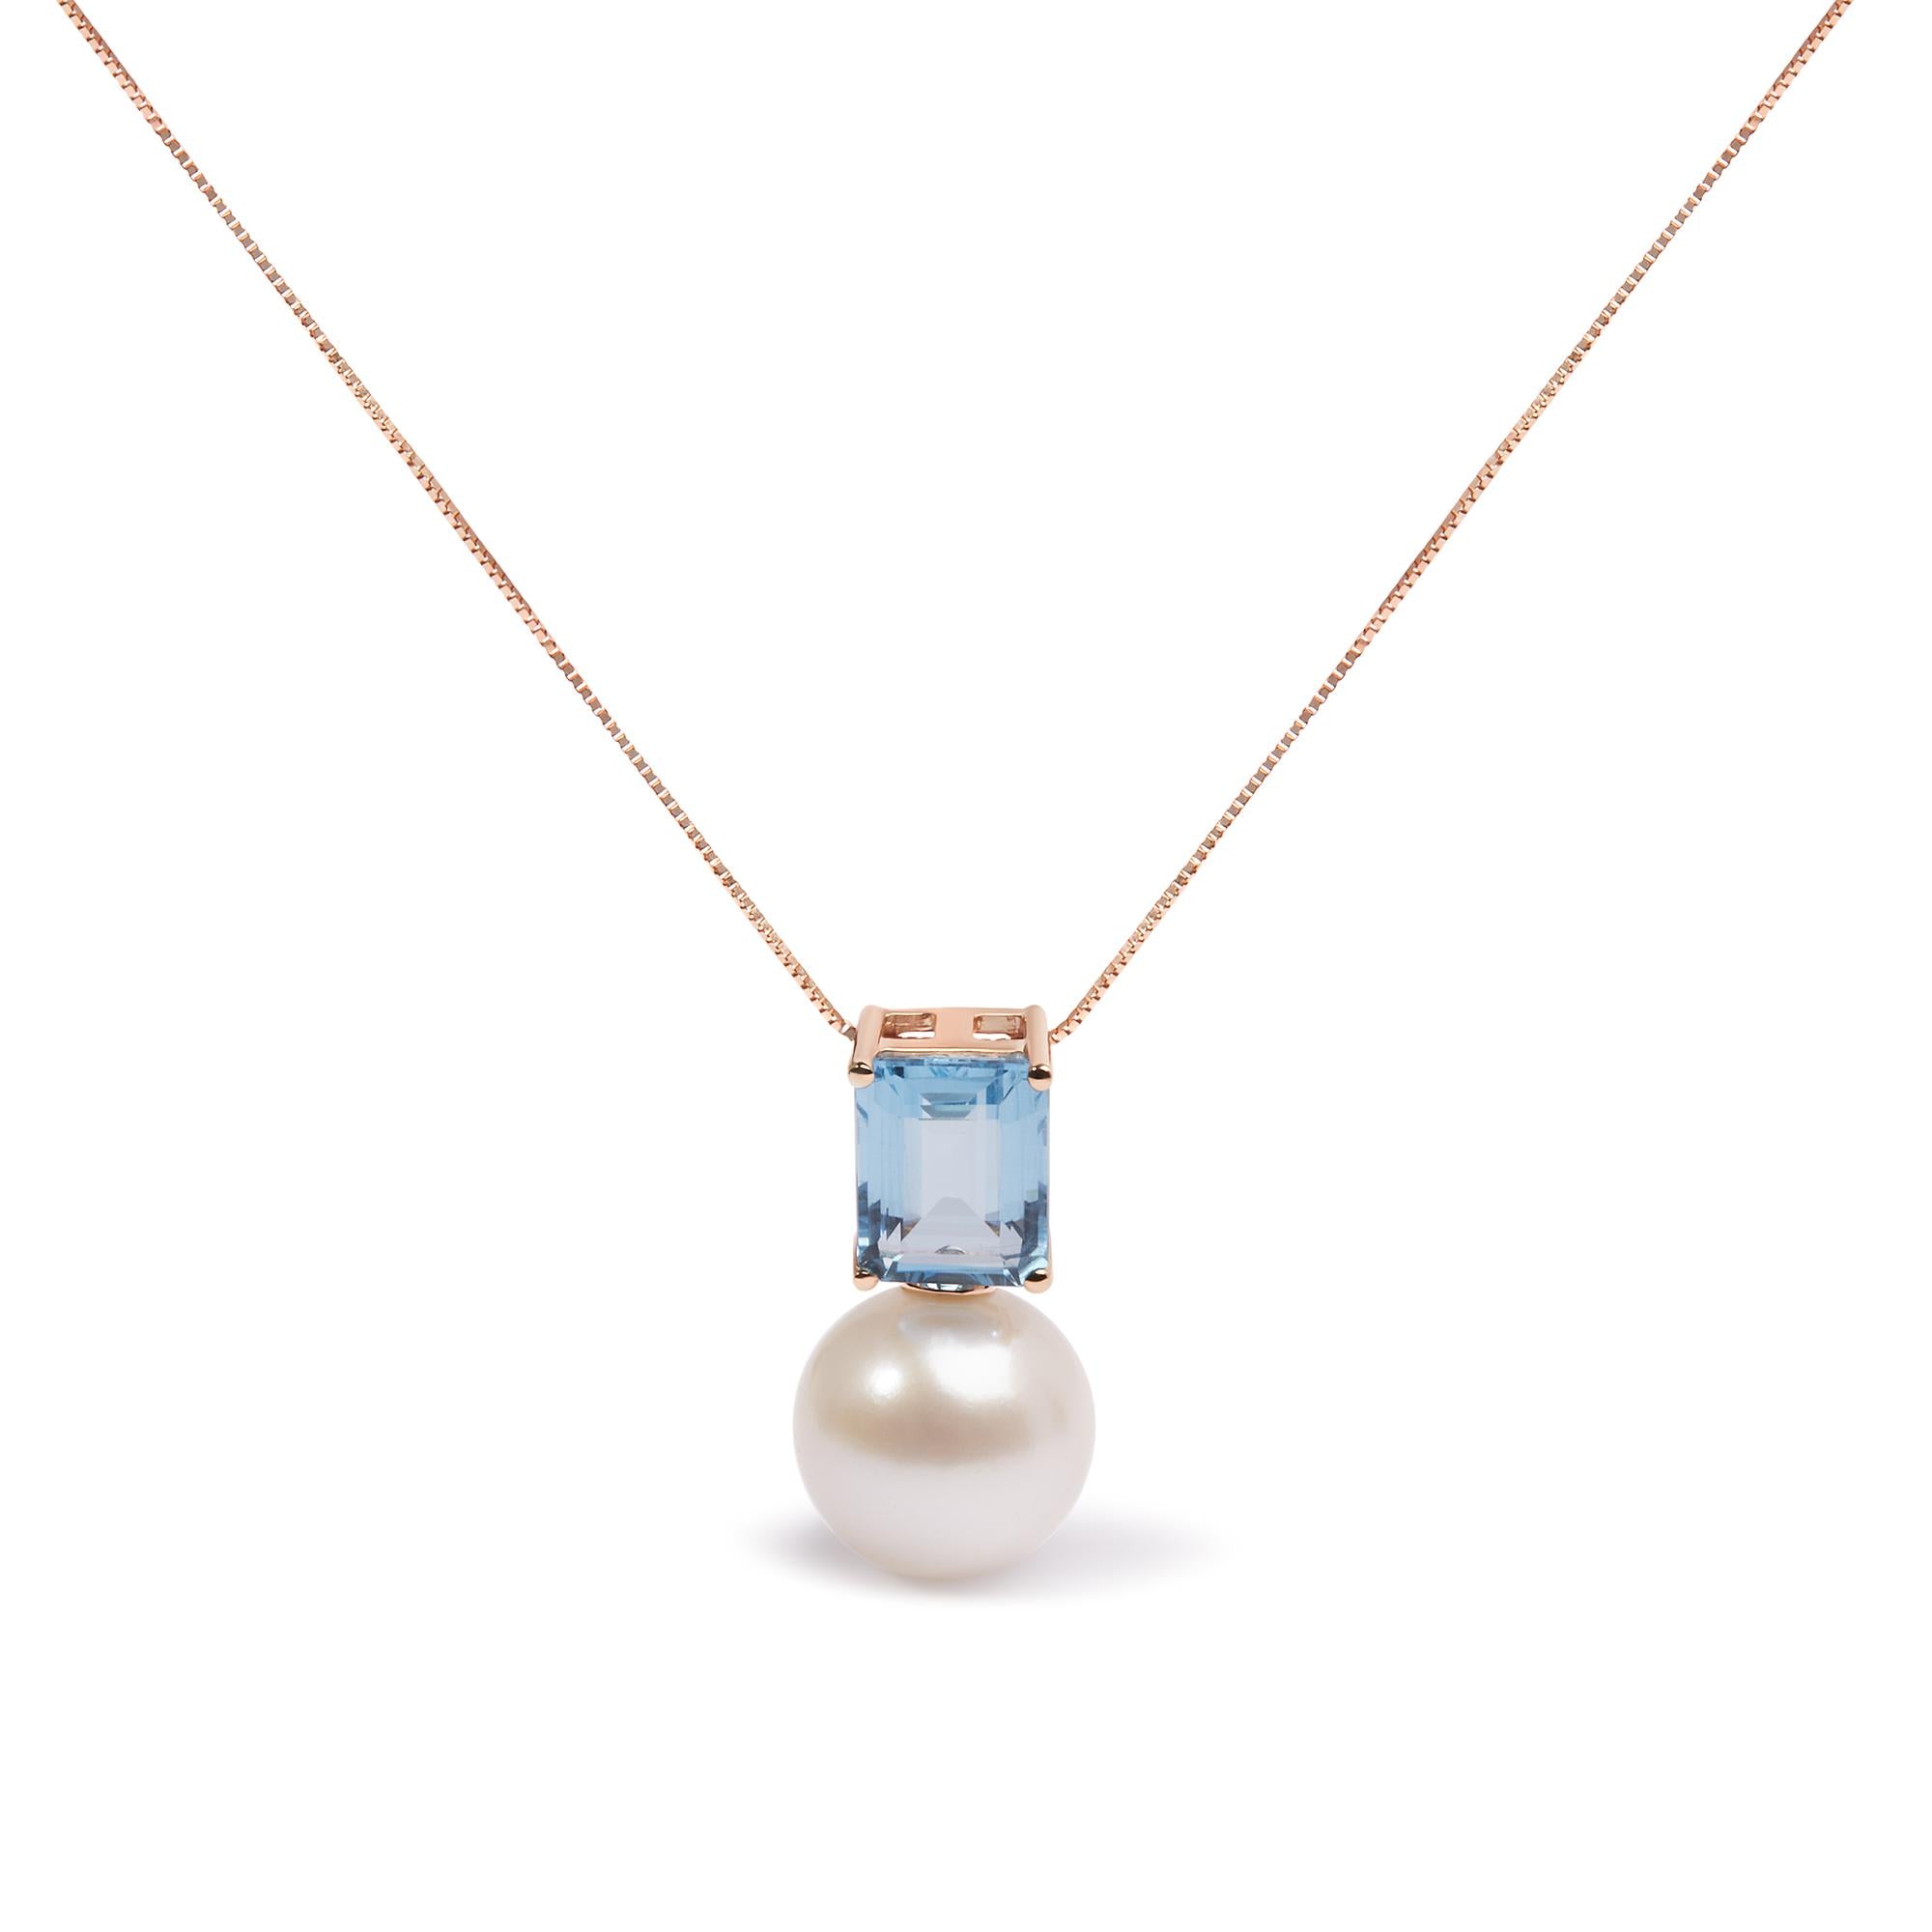 ''14K Rose Gold 11MM Cultured Freshwater Pearl and 9x7mm Octagon Swiss Blue Topaz Pendant NECKLACE - 